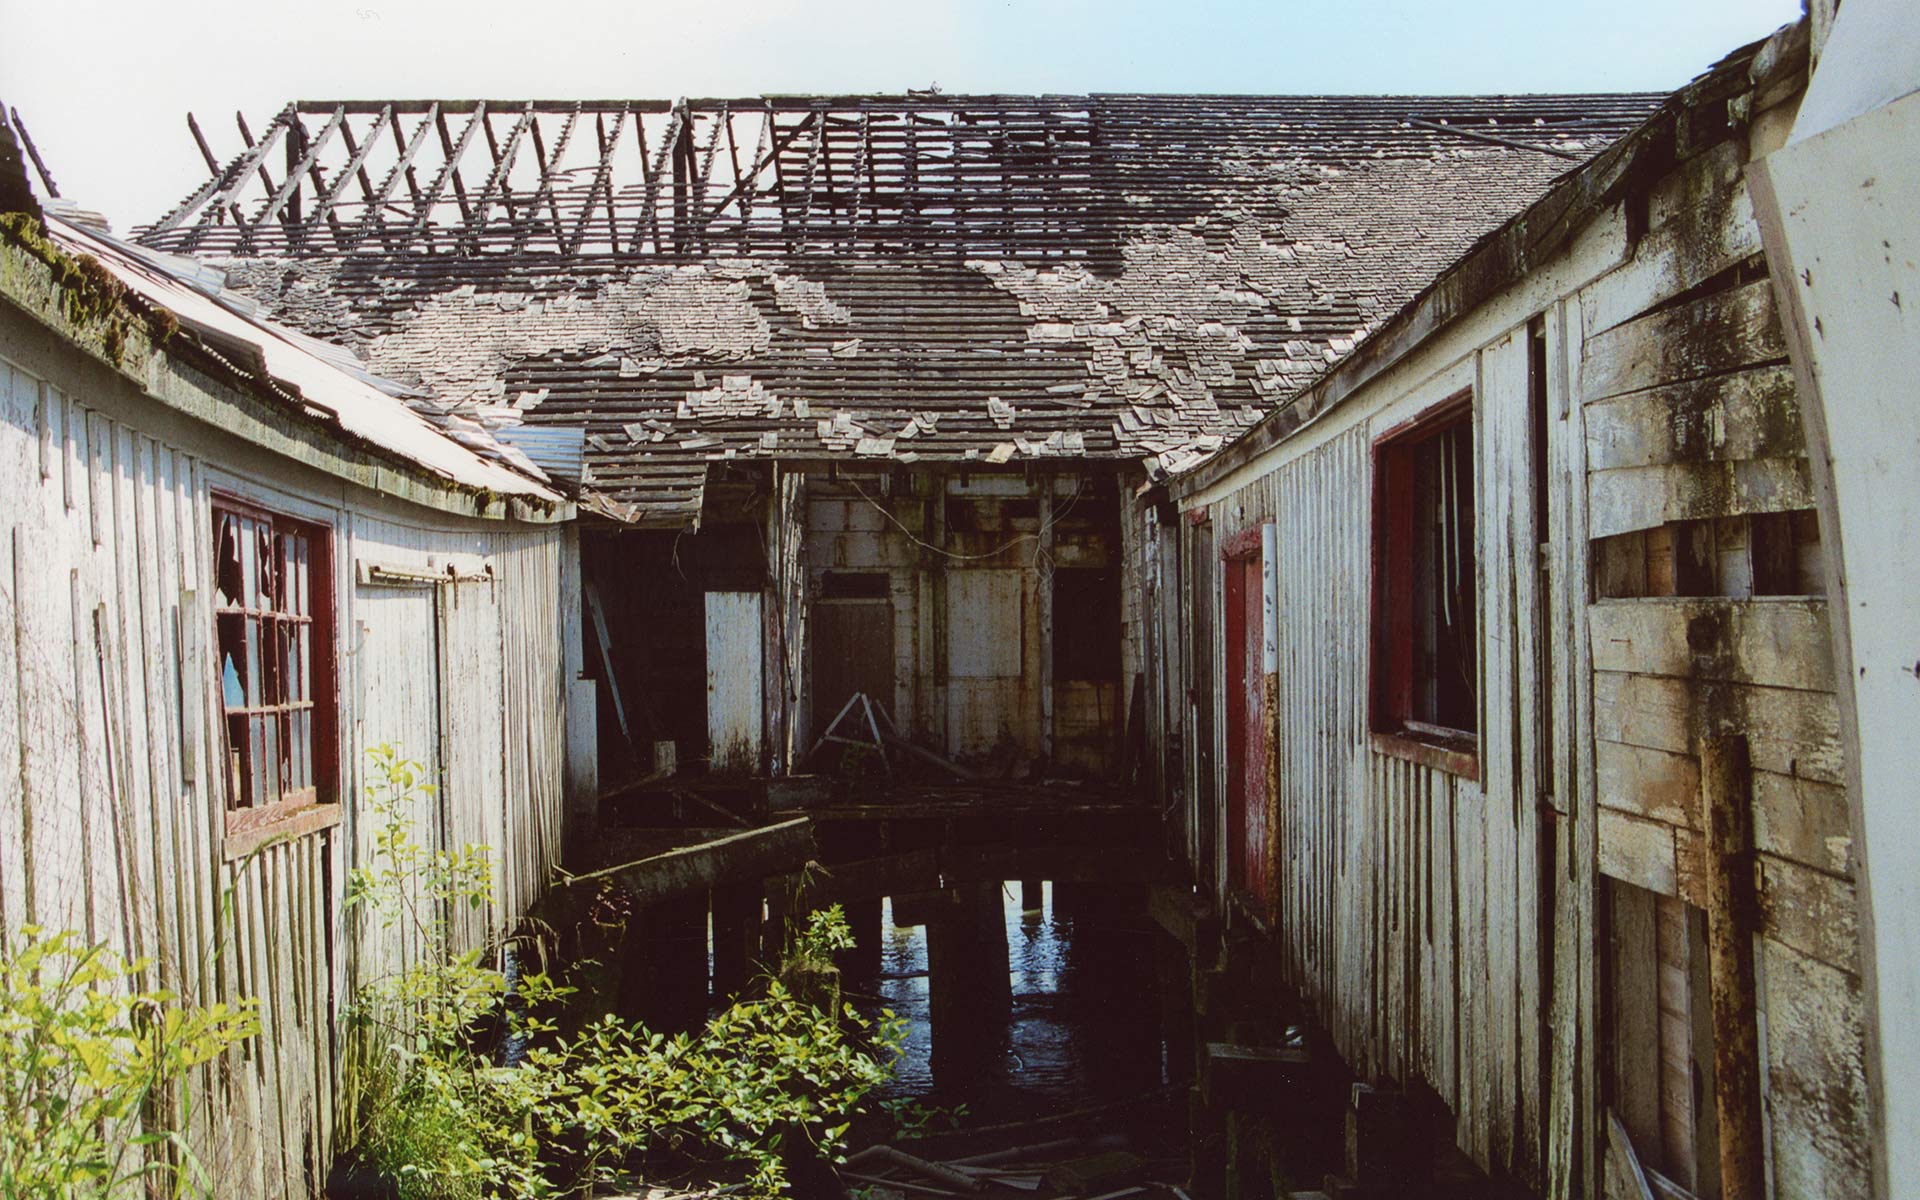 Cannery buildings in disrepair with planks of wood in the water, and broken windows.